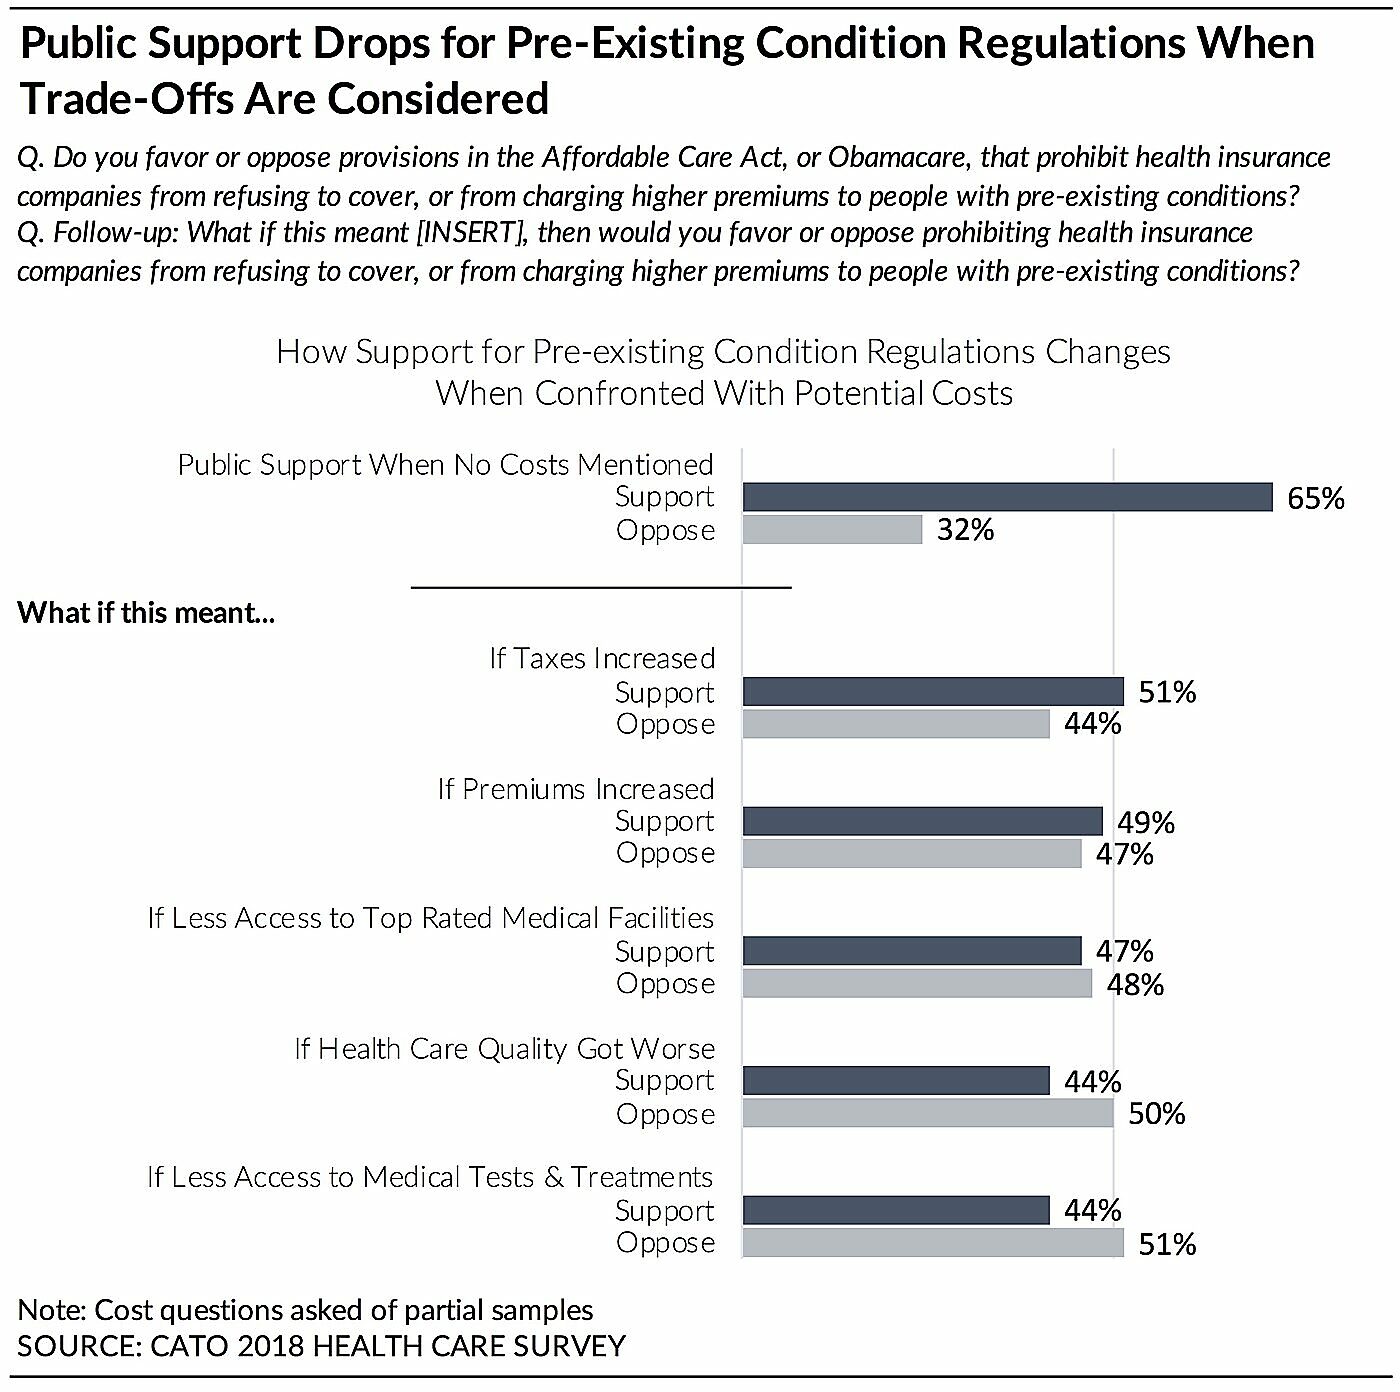 Public Support Drops for Preexisting Condition Regulations When Trade-Offs Are Considered